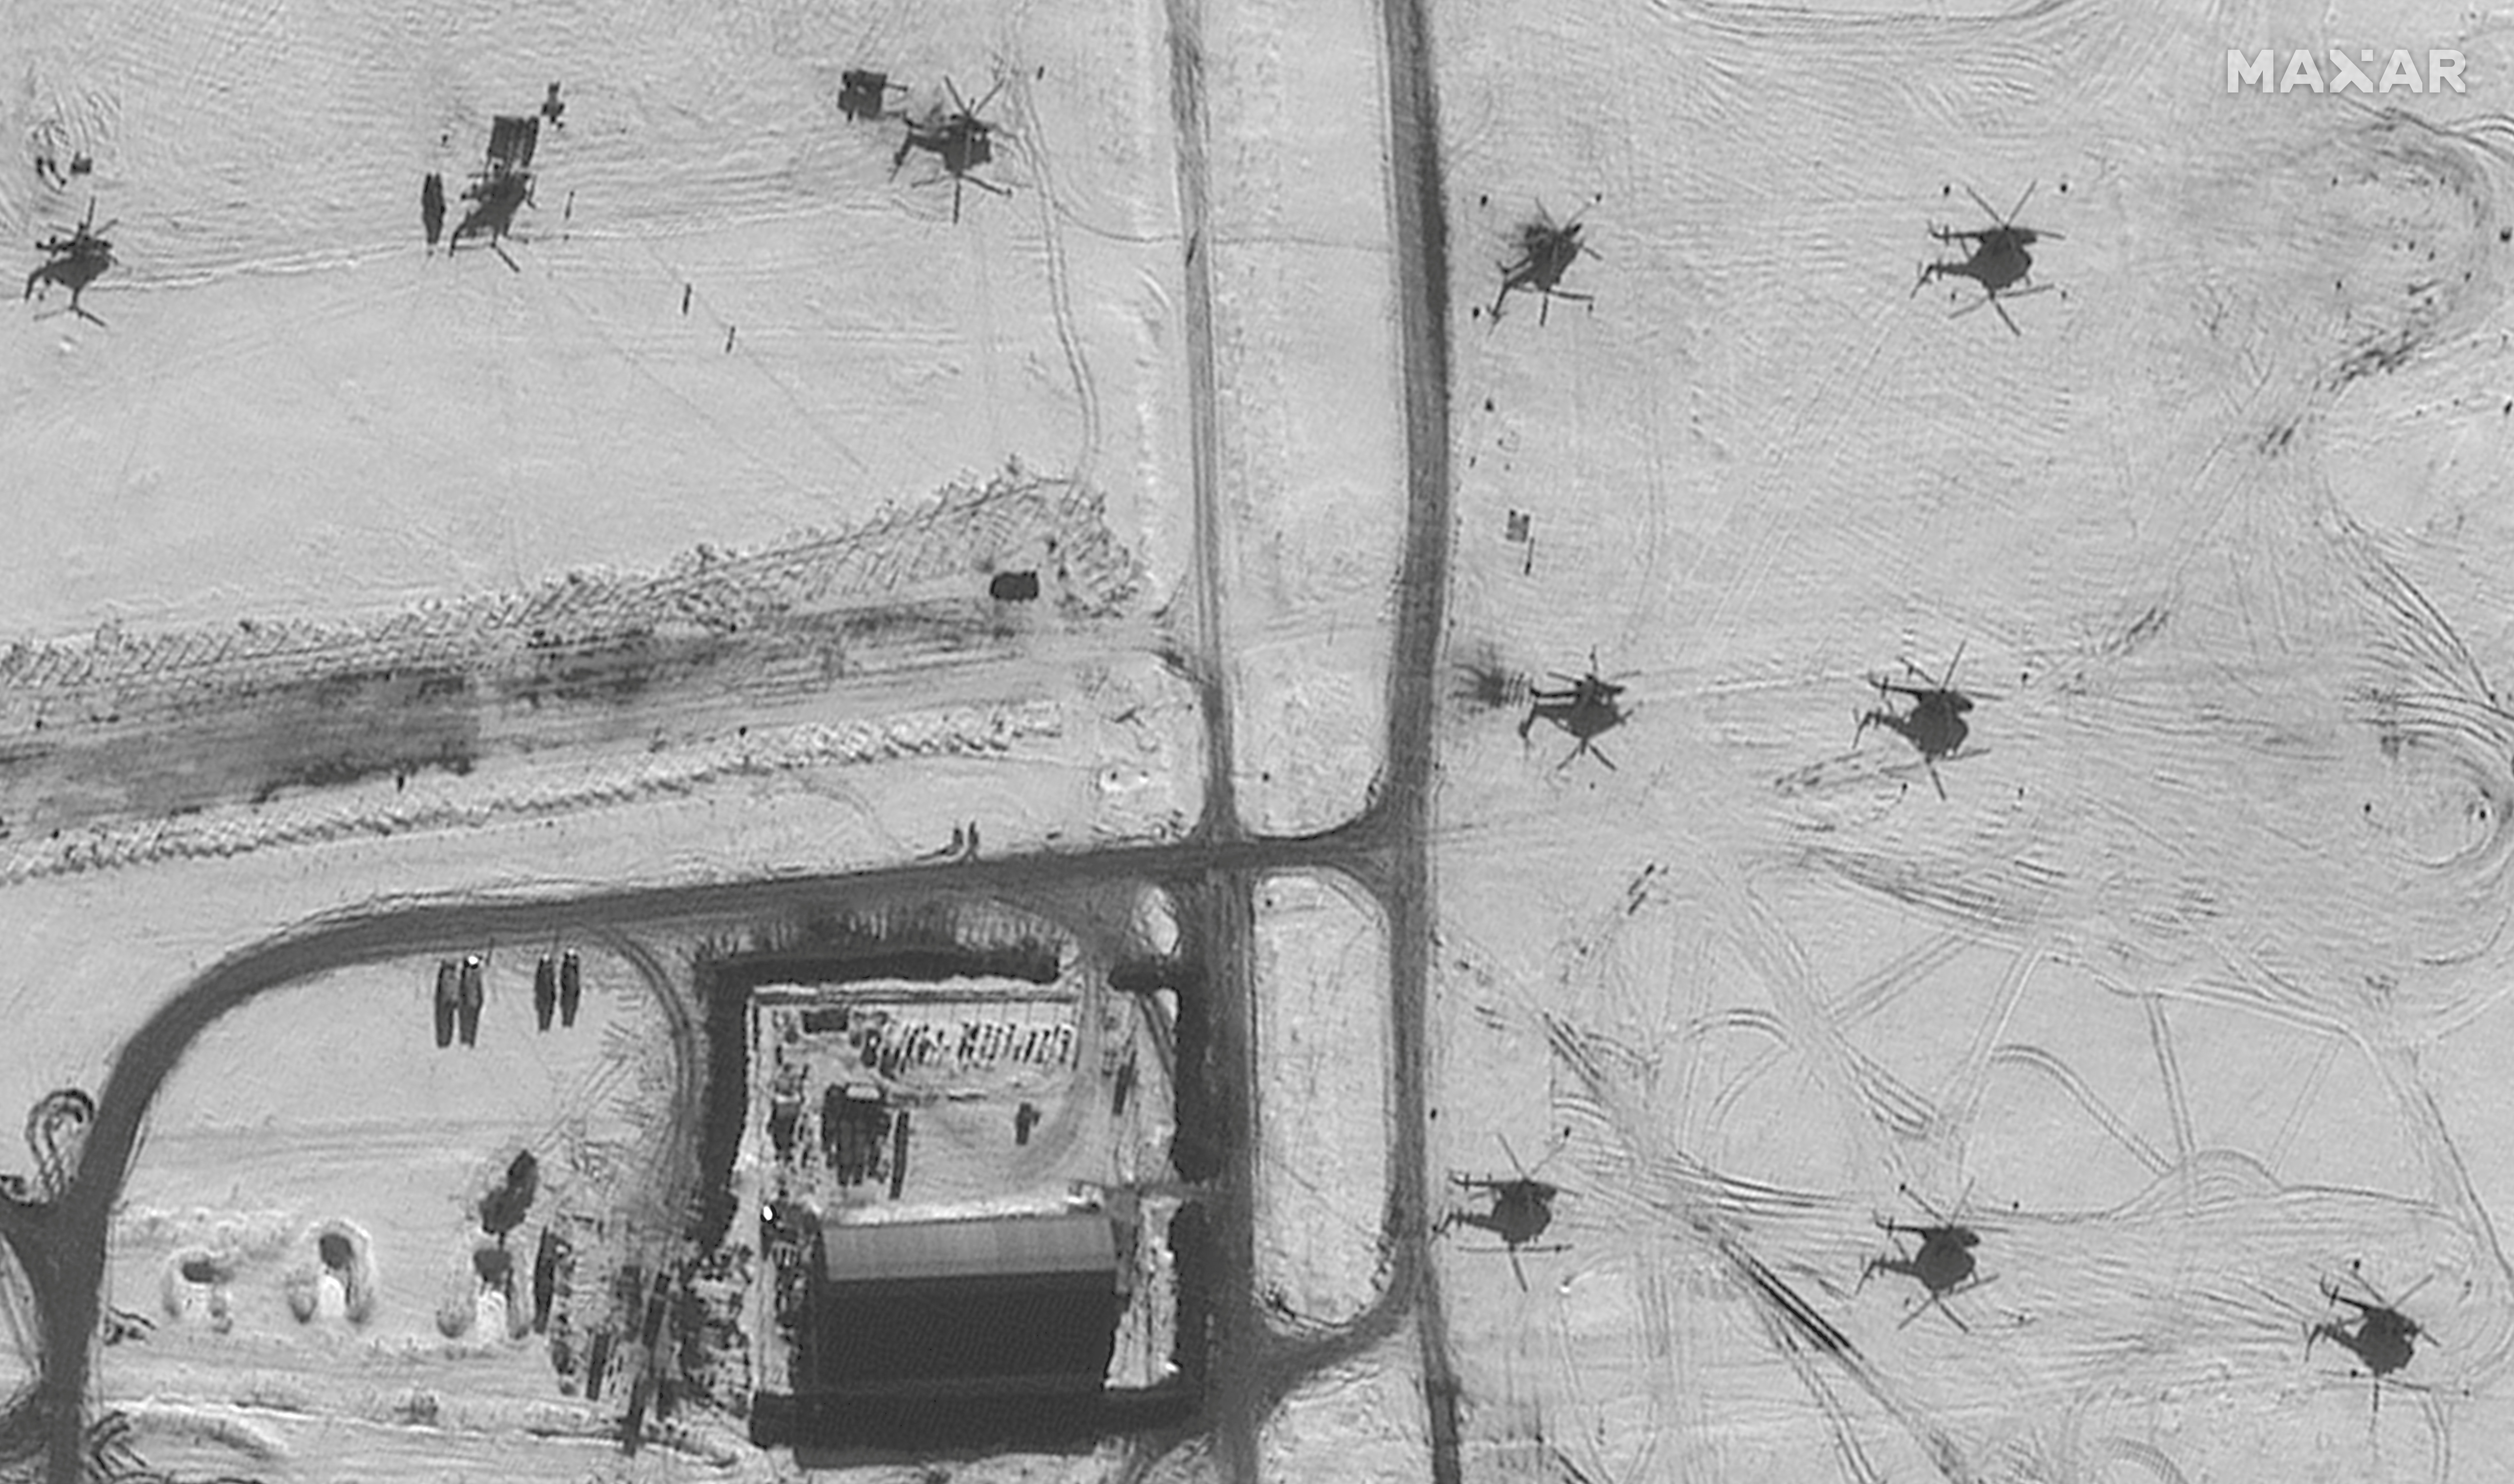 Satellite image shows helicopter deployments at Valuyki